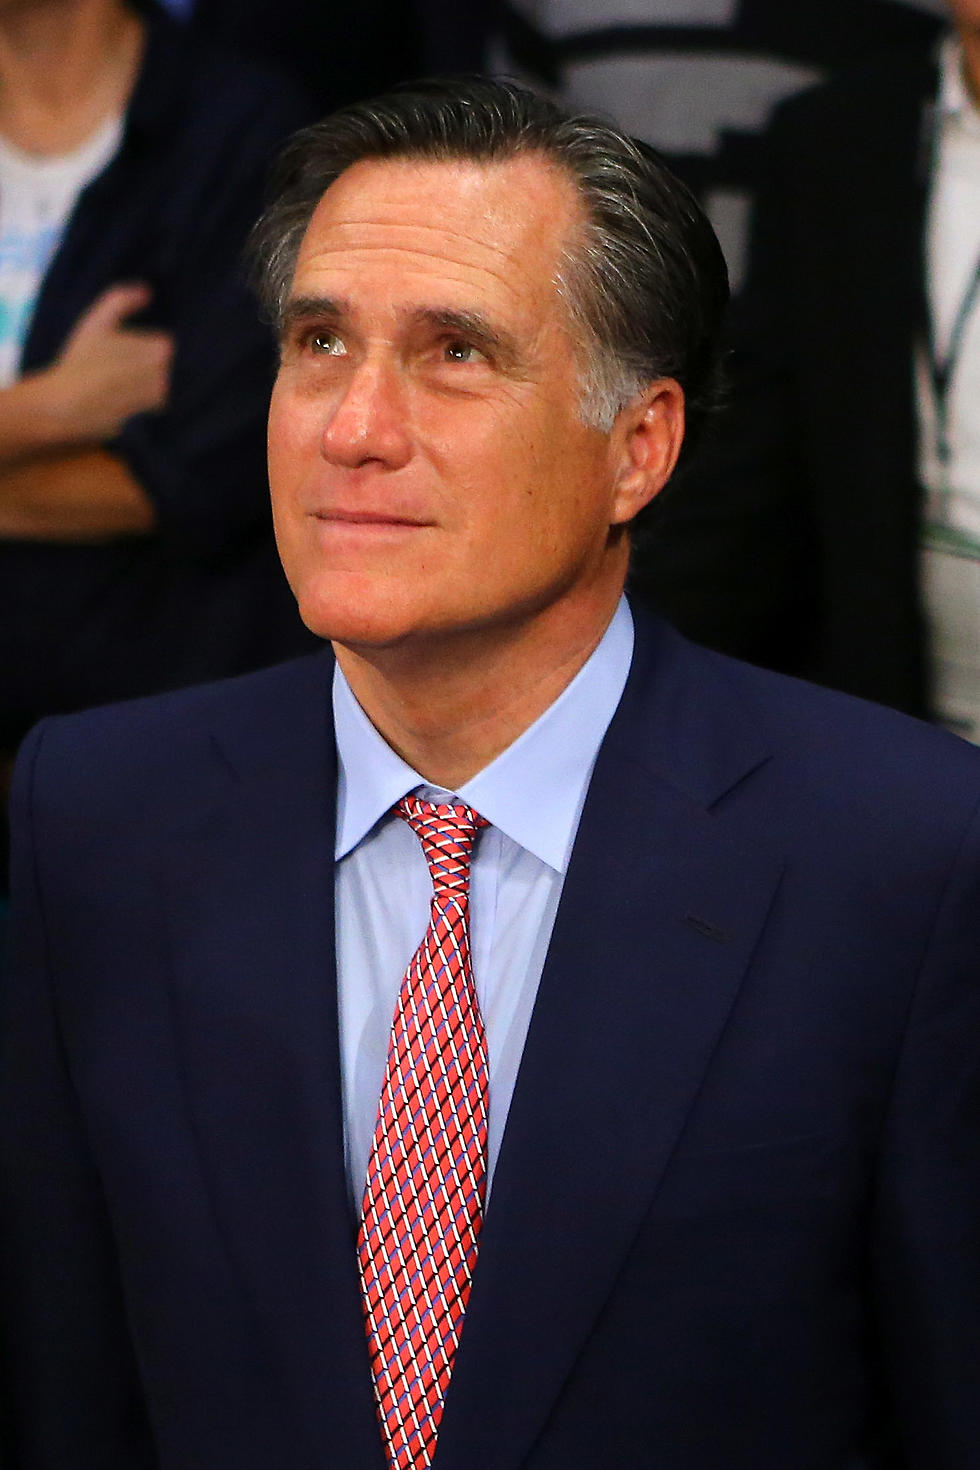 Utahans Excited about Possible Re-Run of Romney